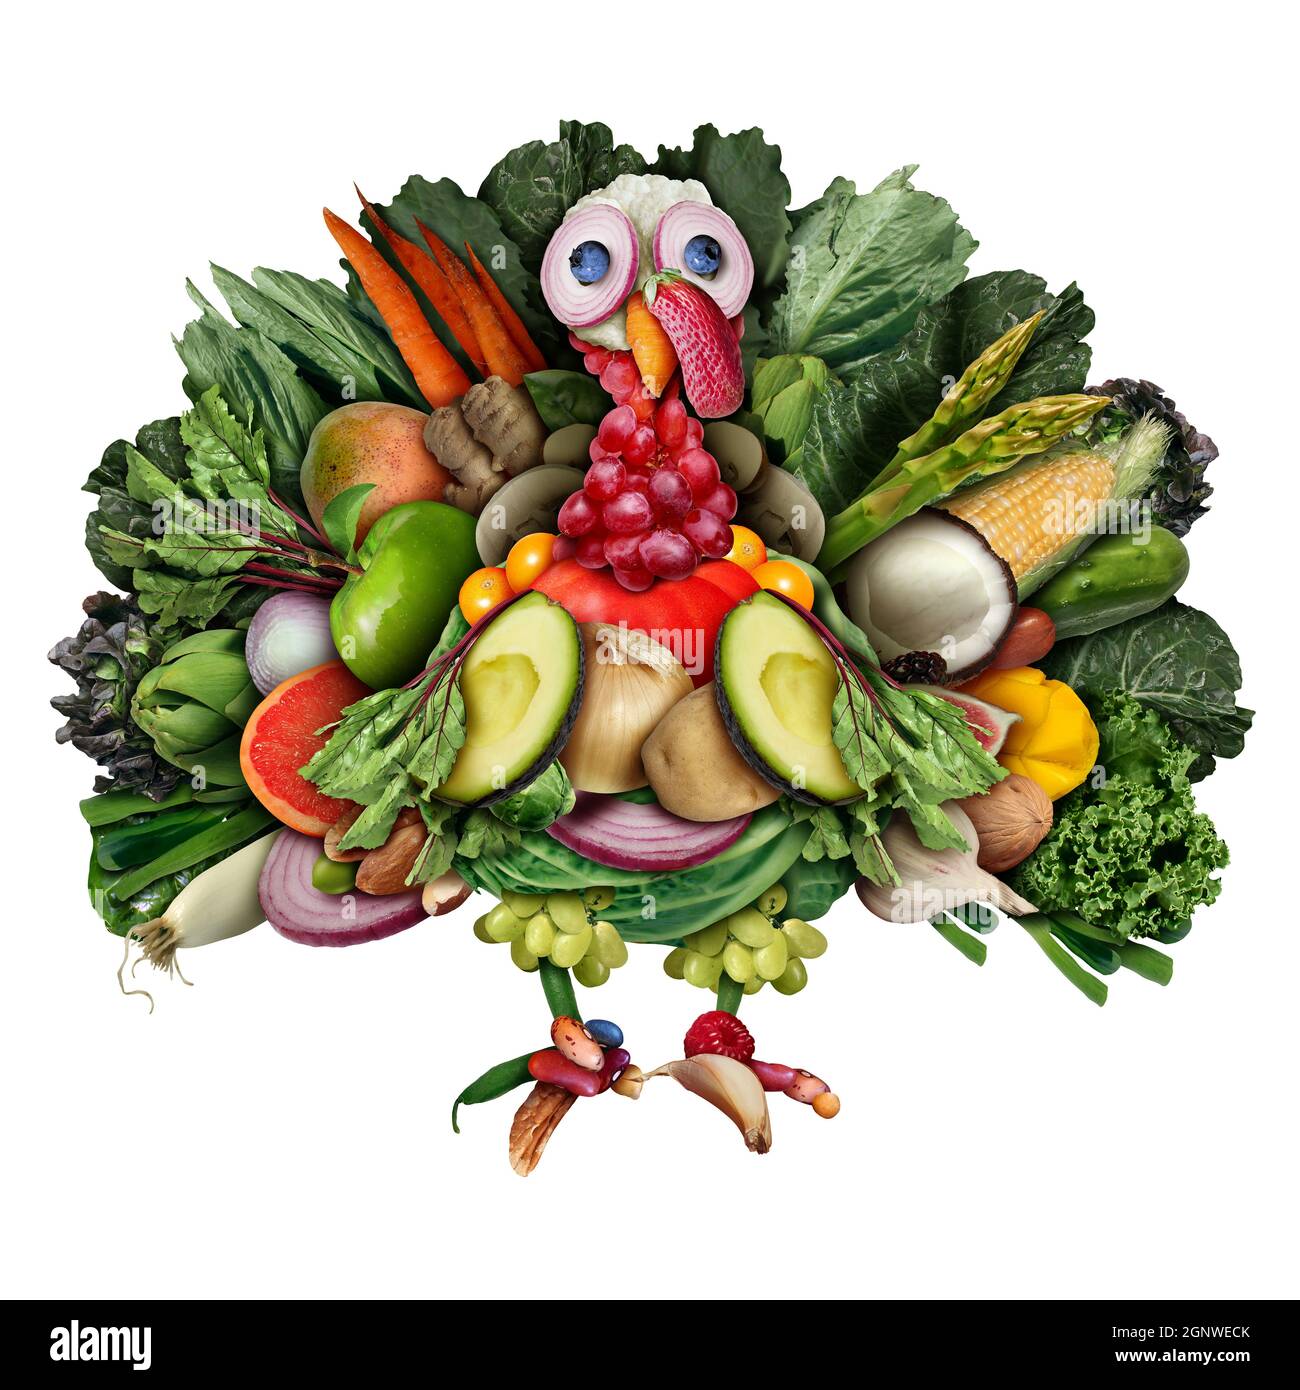 Vegan turkey and funny vegetarian thanksgiving harvest symbol as vegetables fruit nuts and berries shaped as a festive gobbler for a holiday. Stock Photo